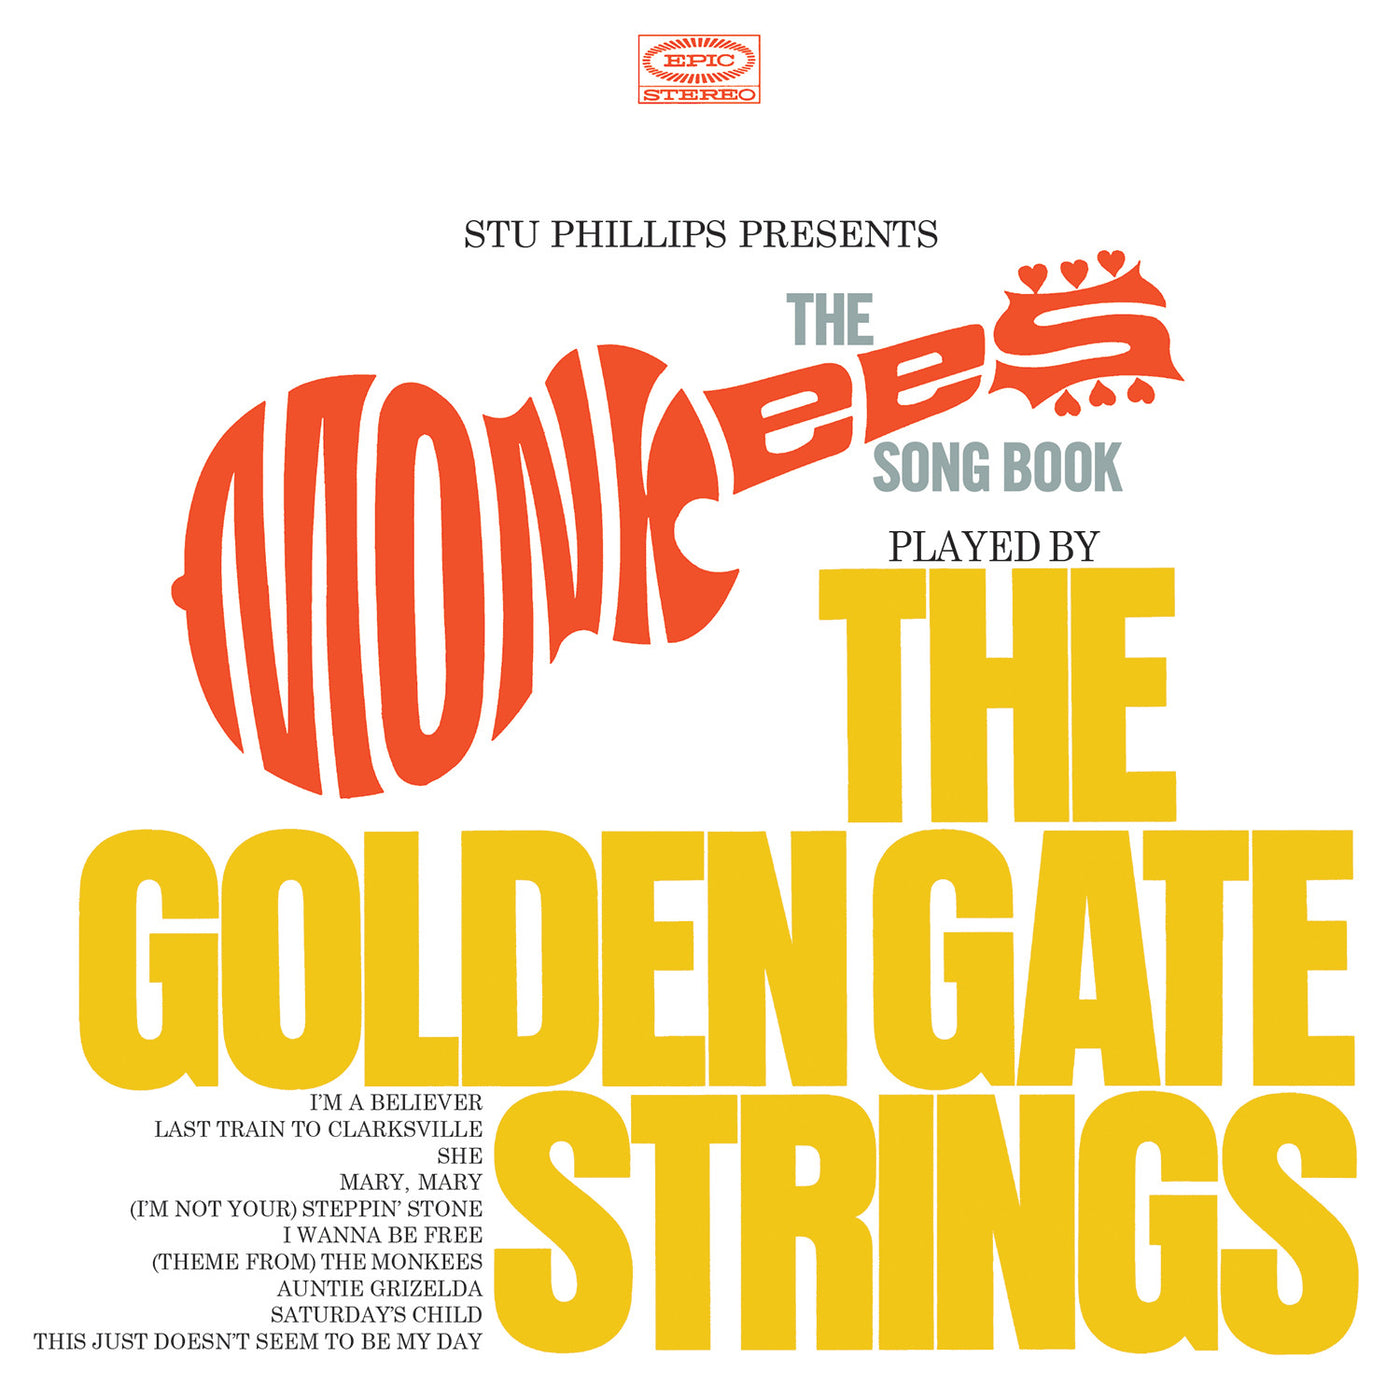 Stu Phillips Presents: The Monkees Songbook Played By The Golden Gate Strings (CD)